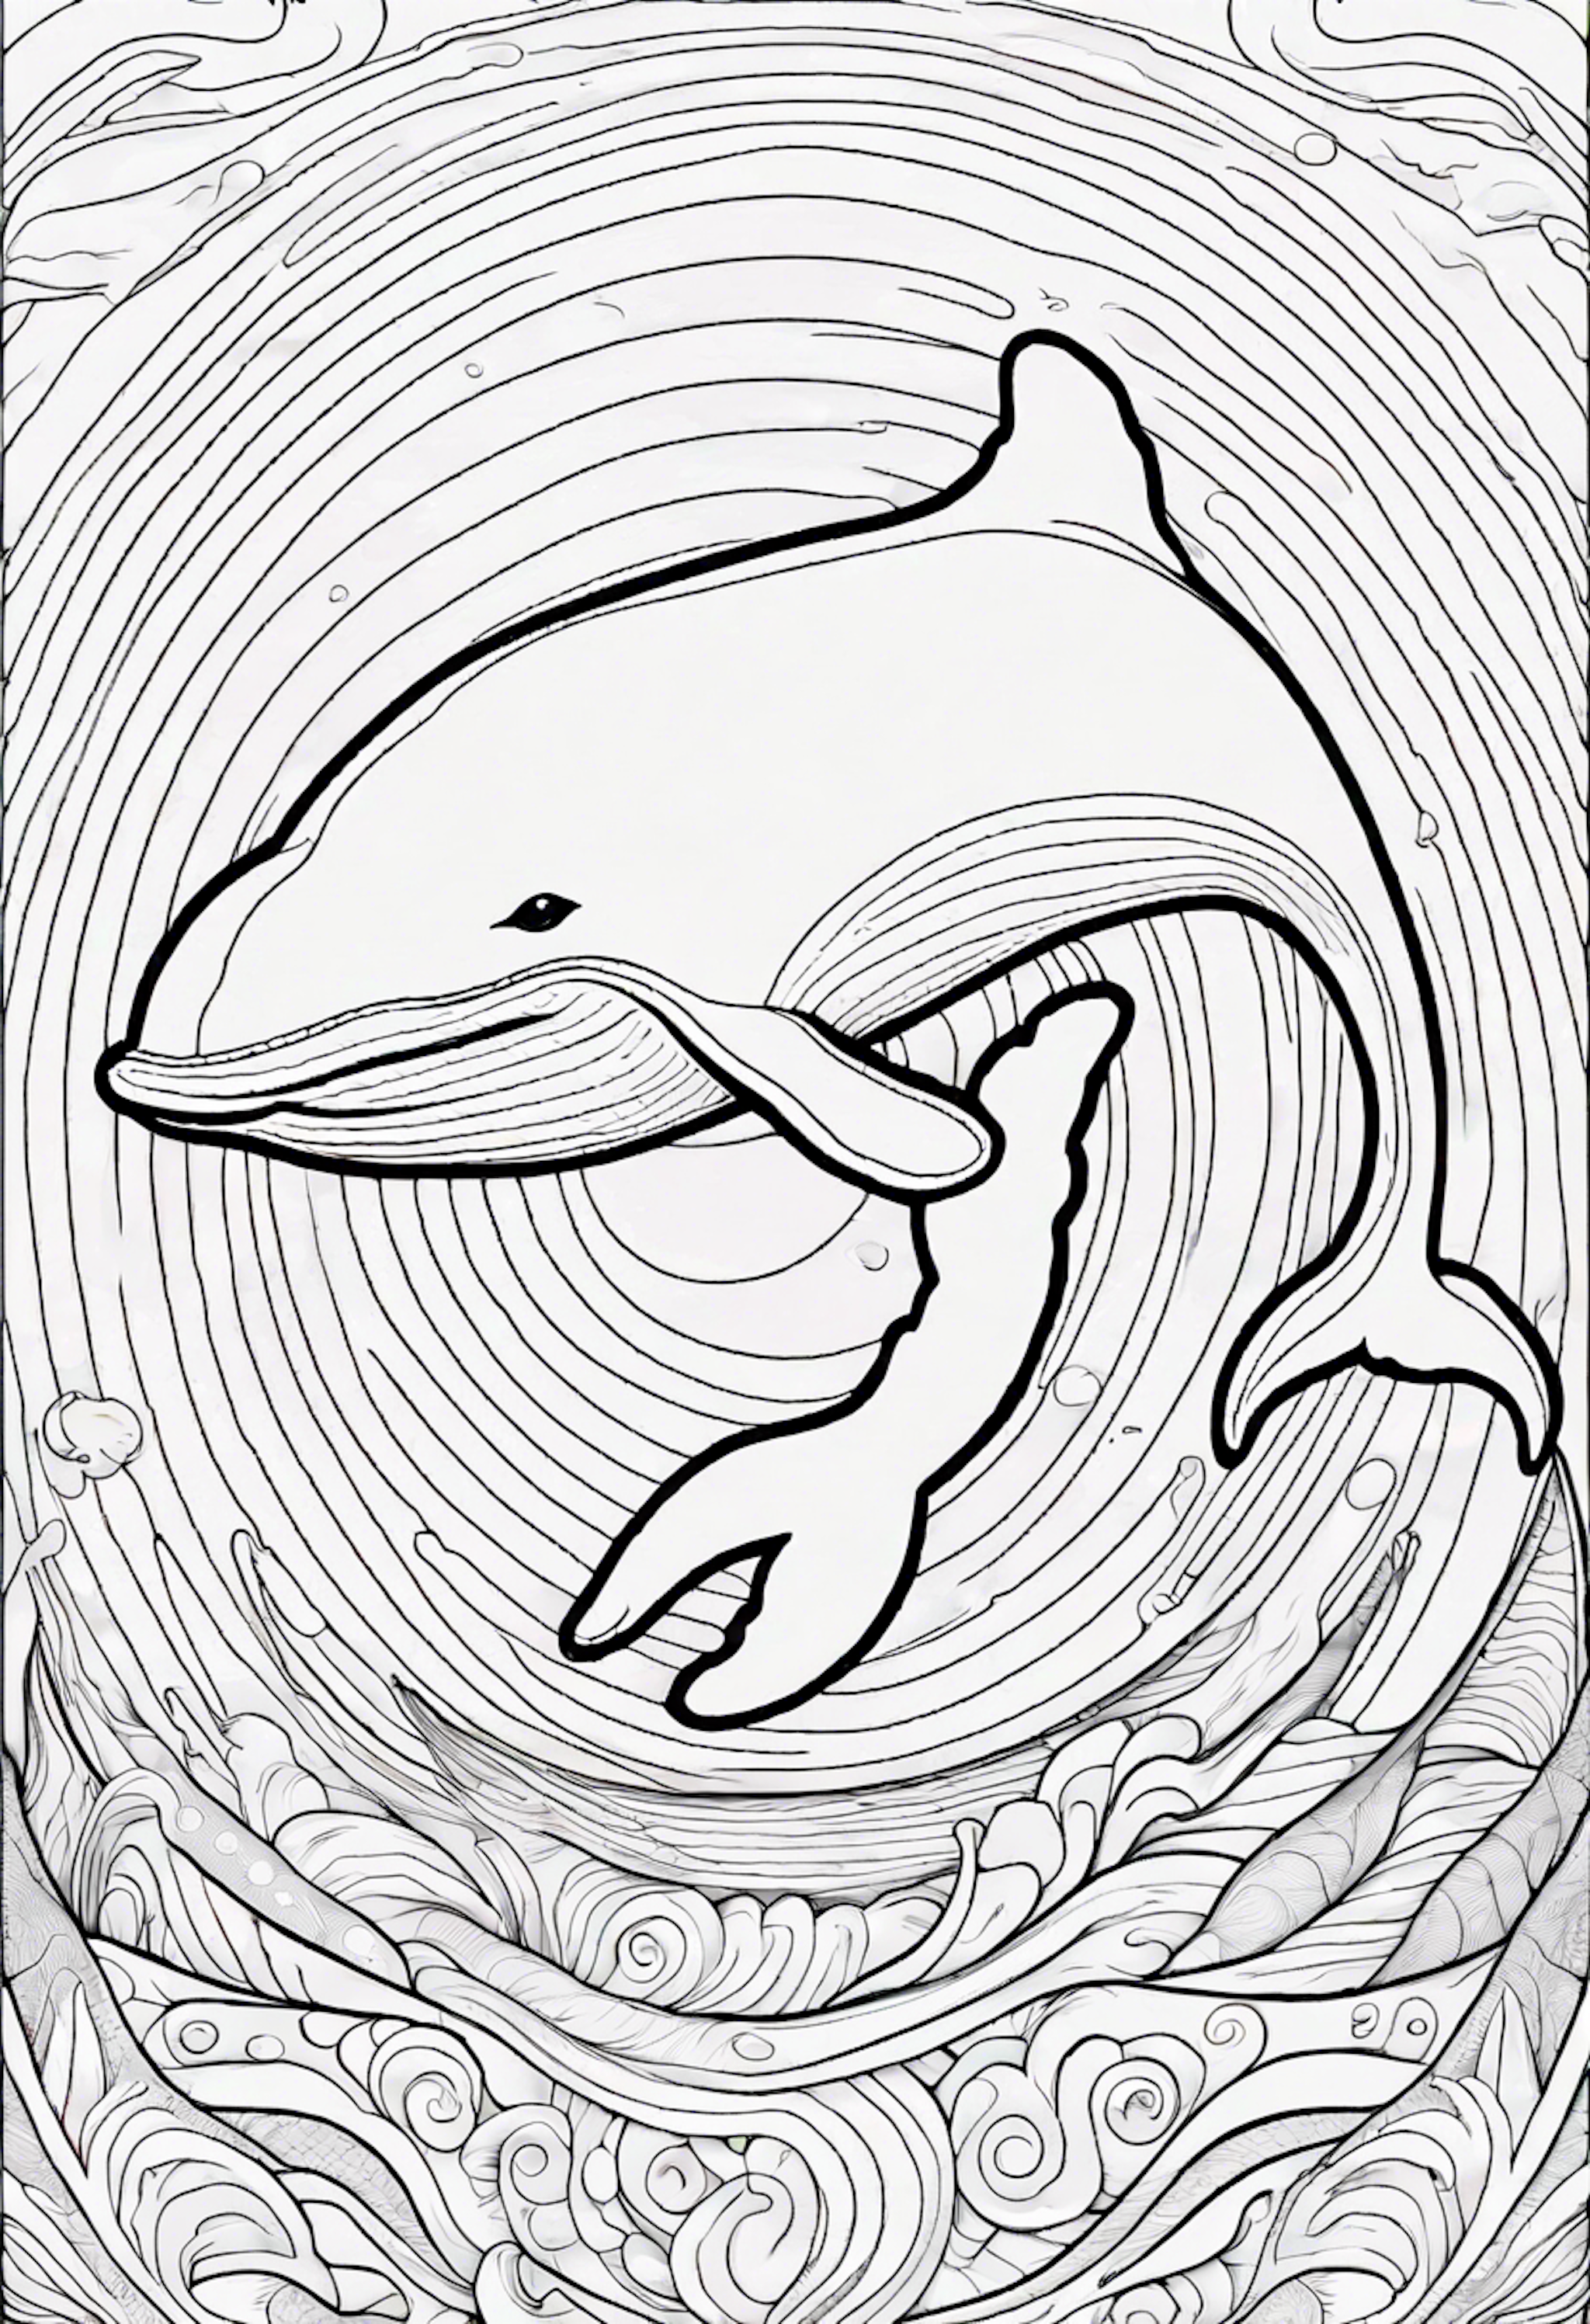 A coloring page for 41 Animal coloring pages